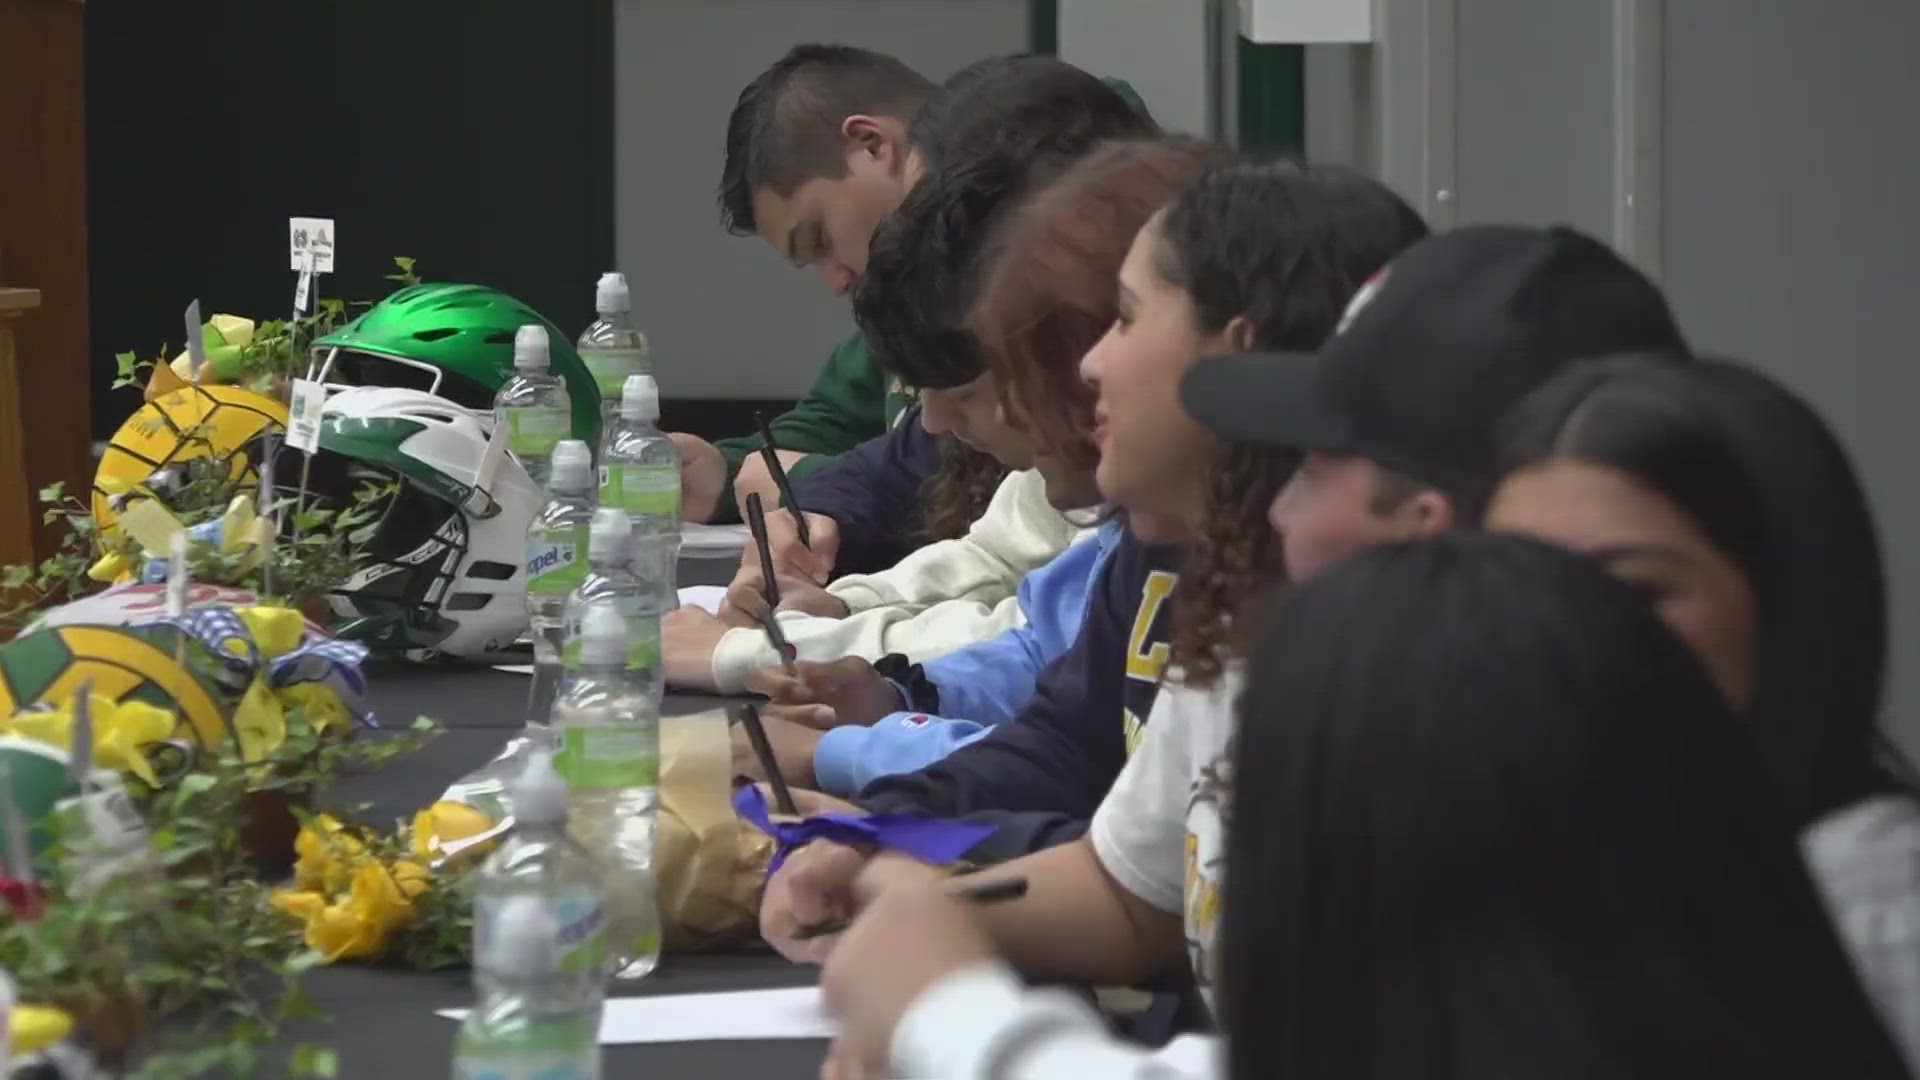 At St. Mary's High School in Stockton, nine different student athletes, playing sports ranging from golf to rugby, signed to division one colleges.